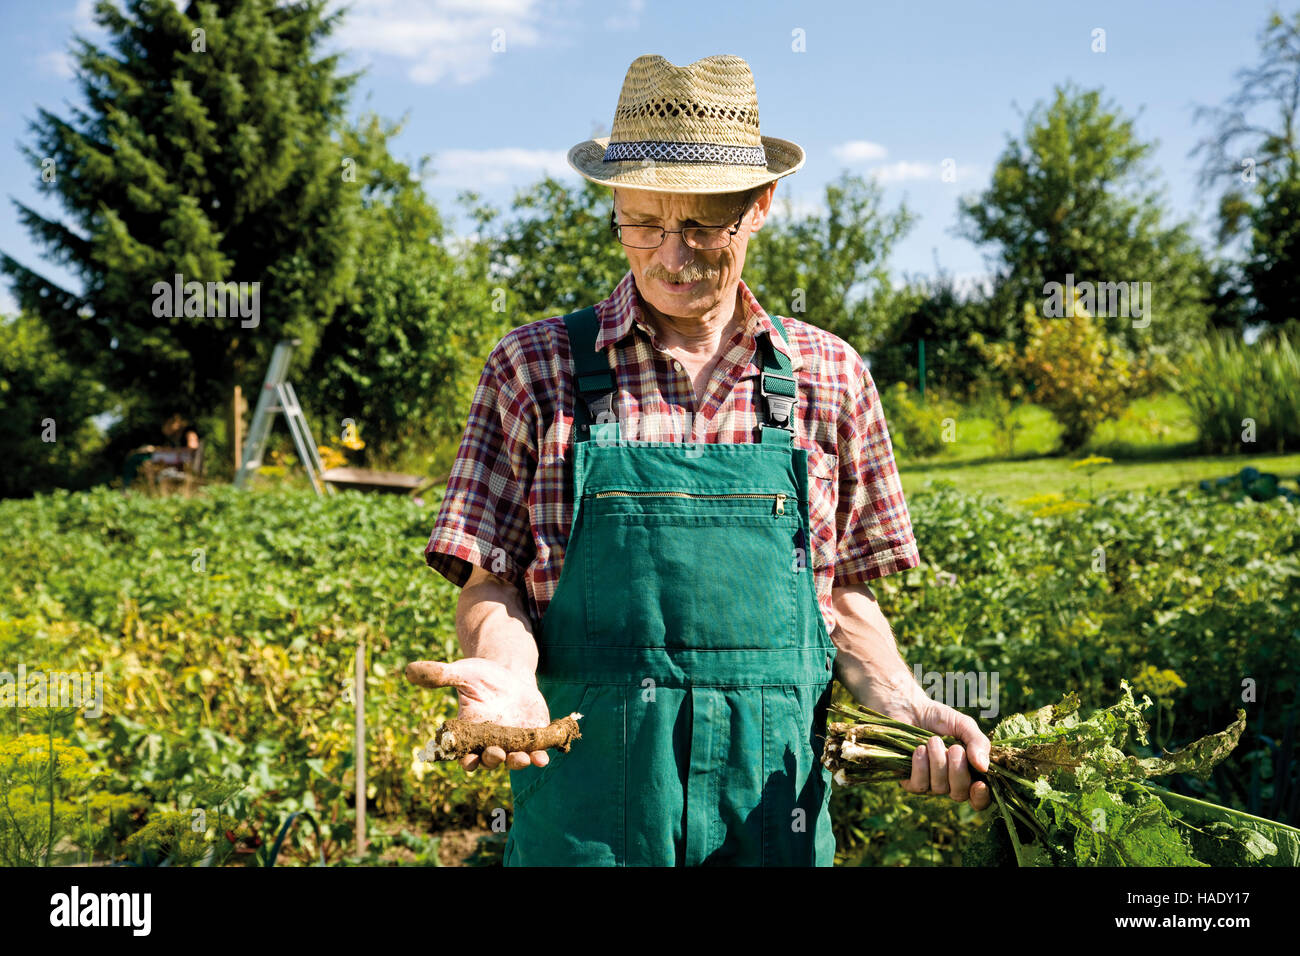 Gardener with harvested horse radish in his hands Stock Photo